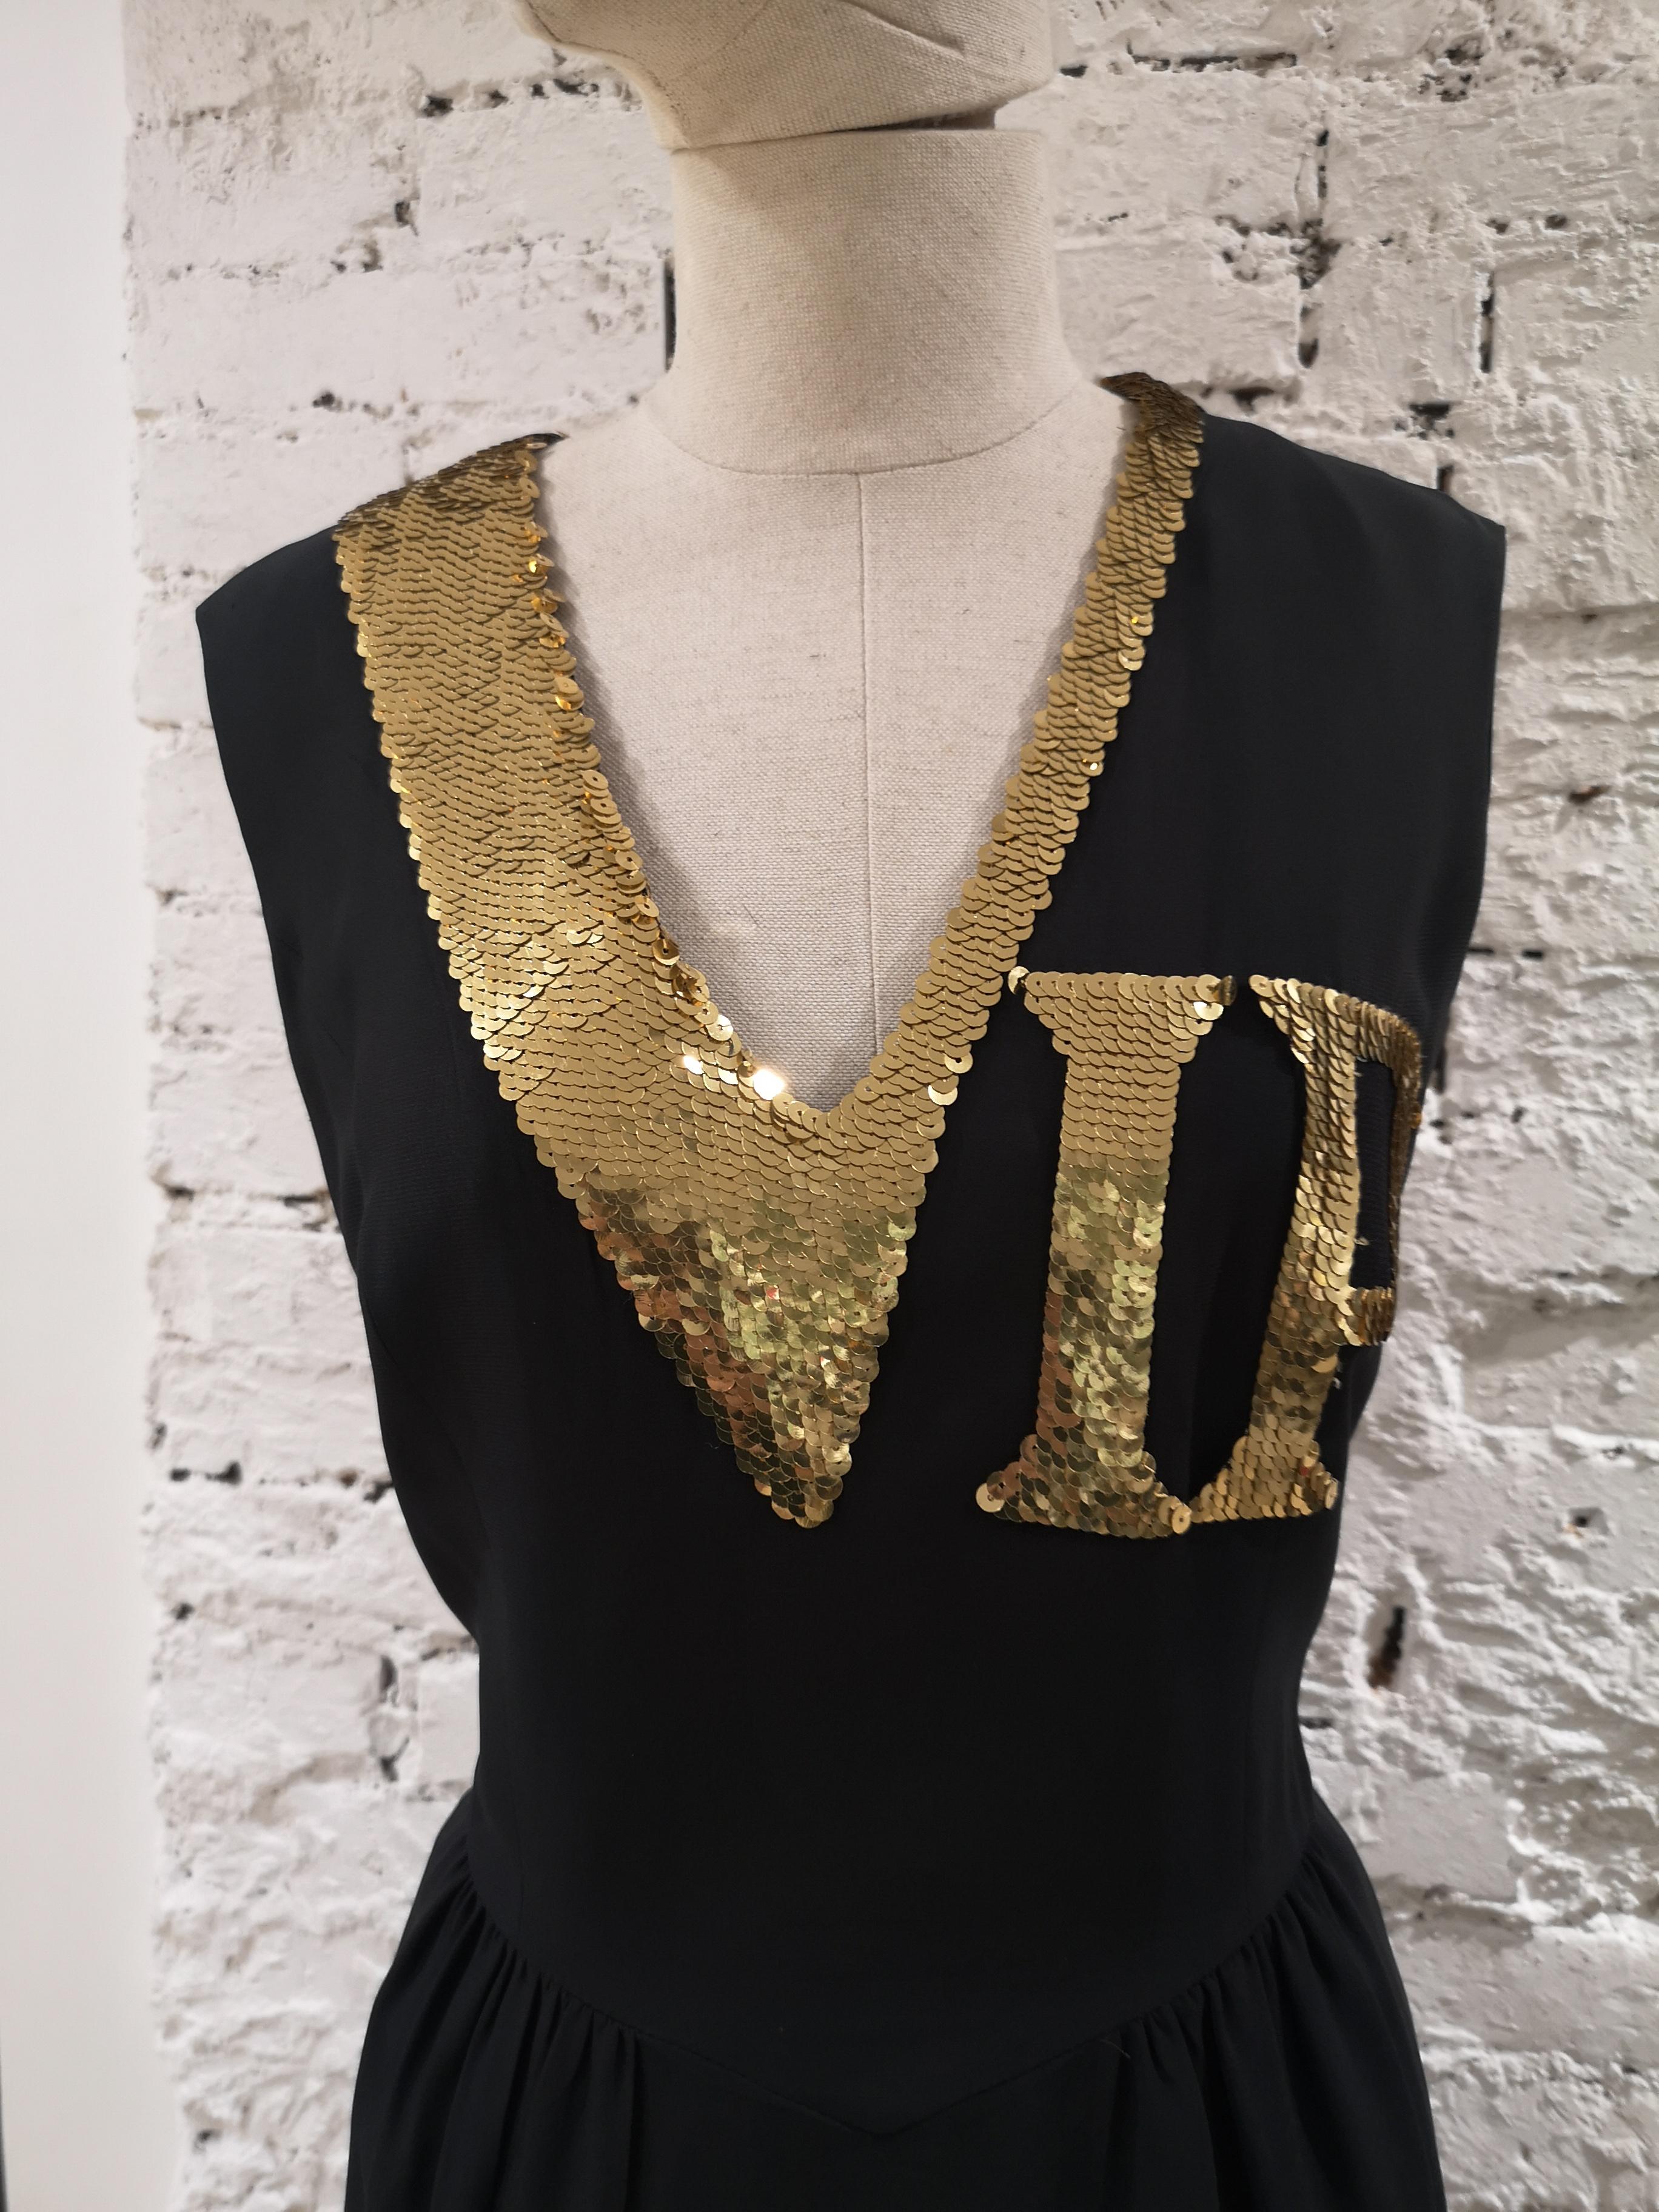 Moschino Gold sequins VIP Dress
VIP dress by Franco Moschino, one of Moschino's most iconic designs. 
black dress with gold sequin 